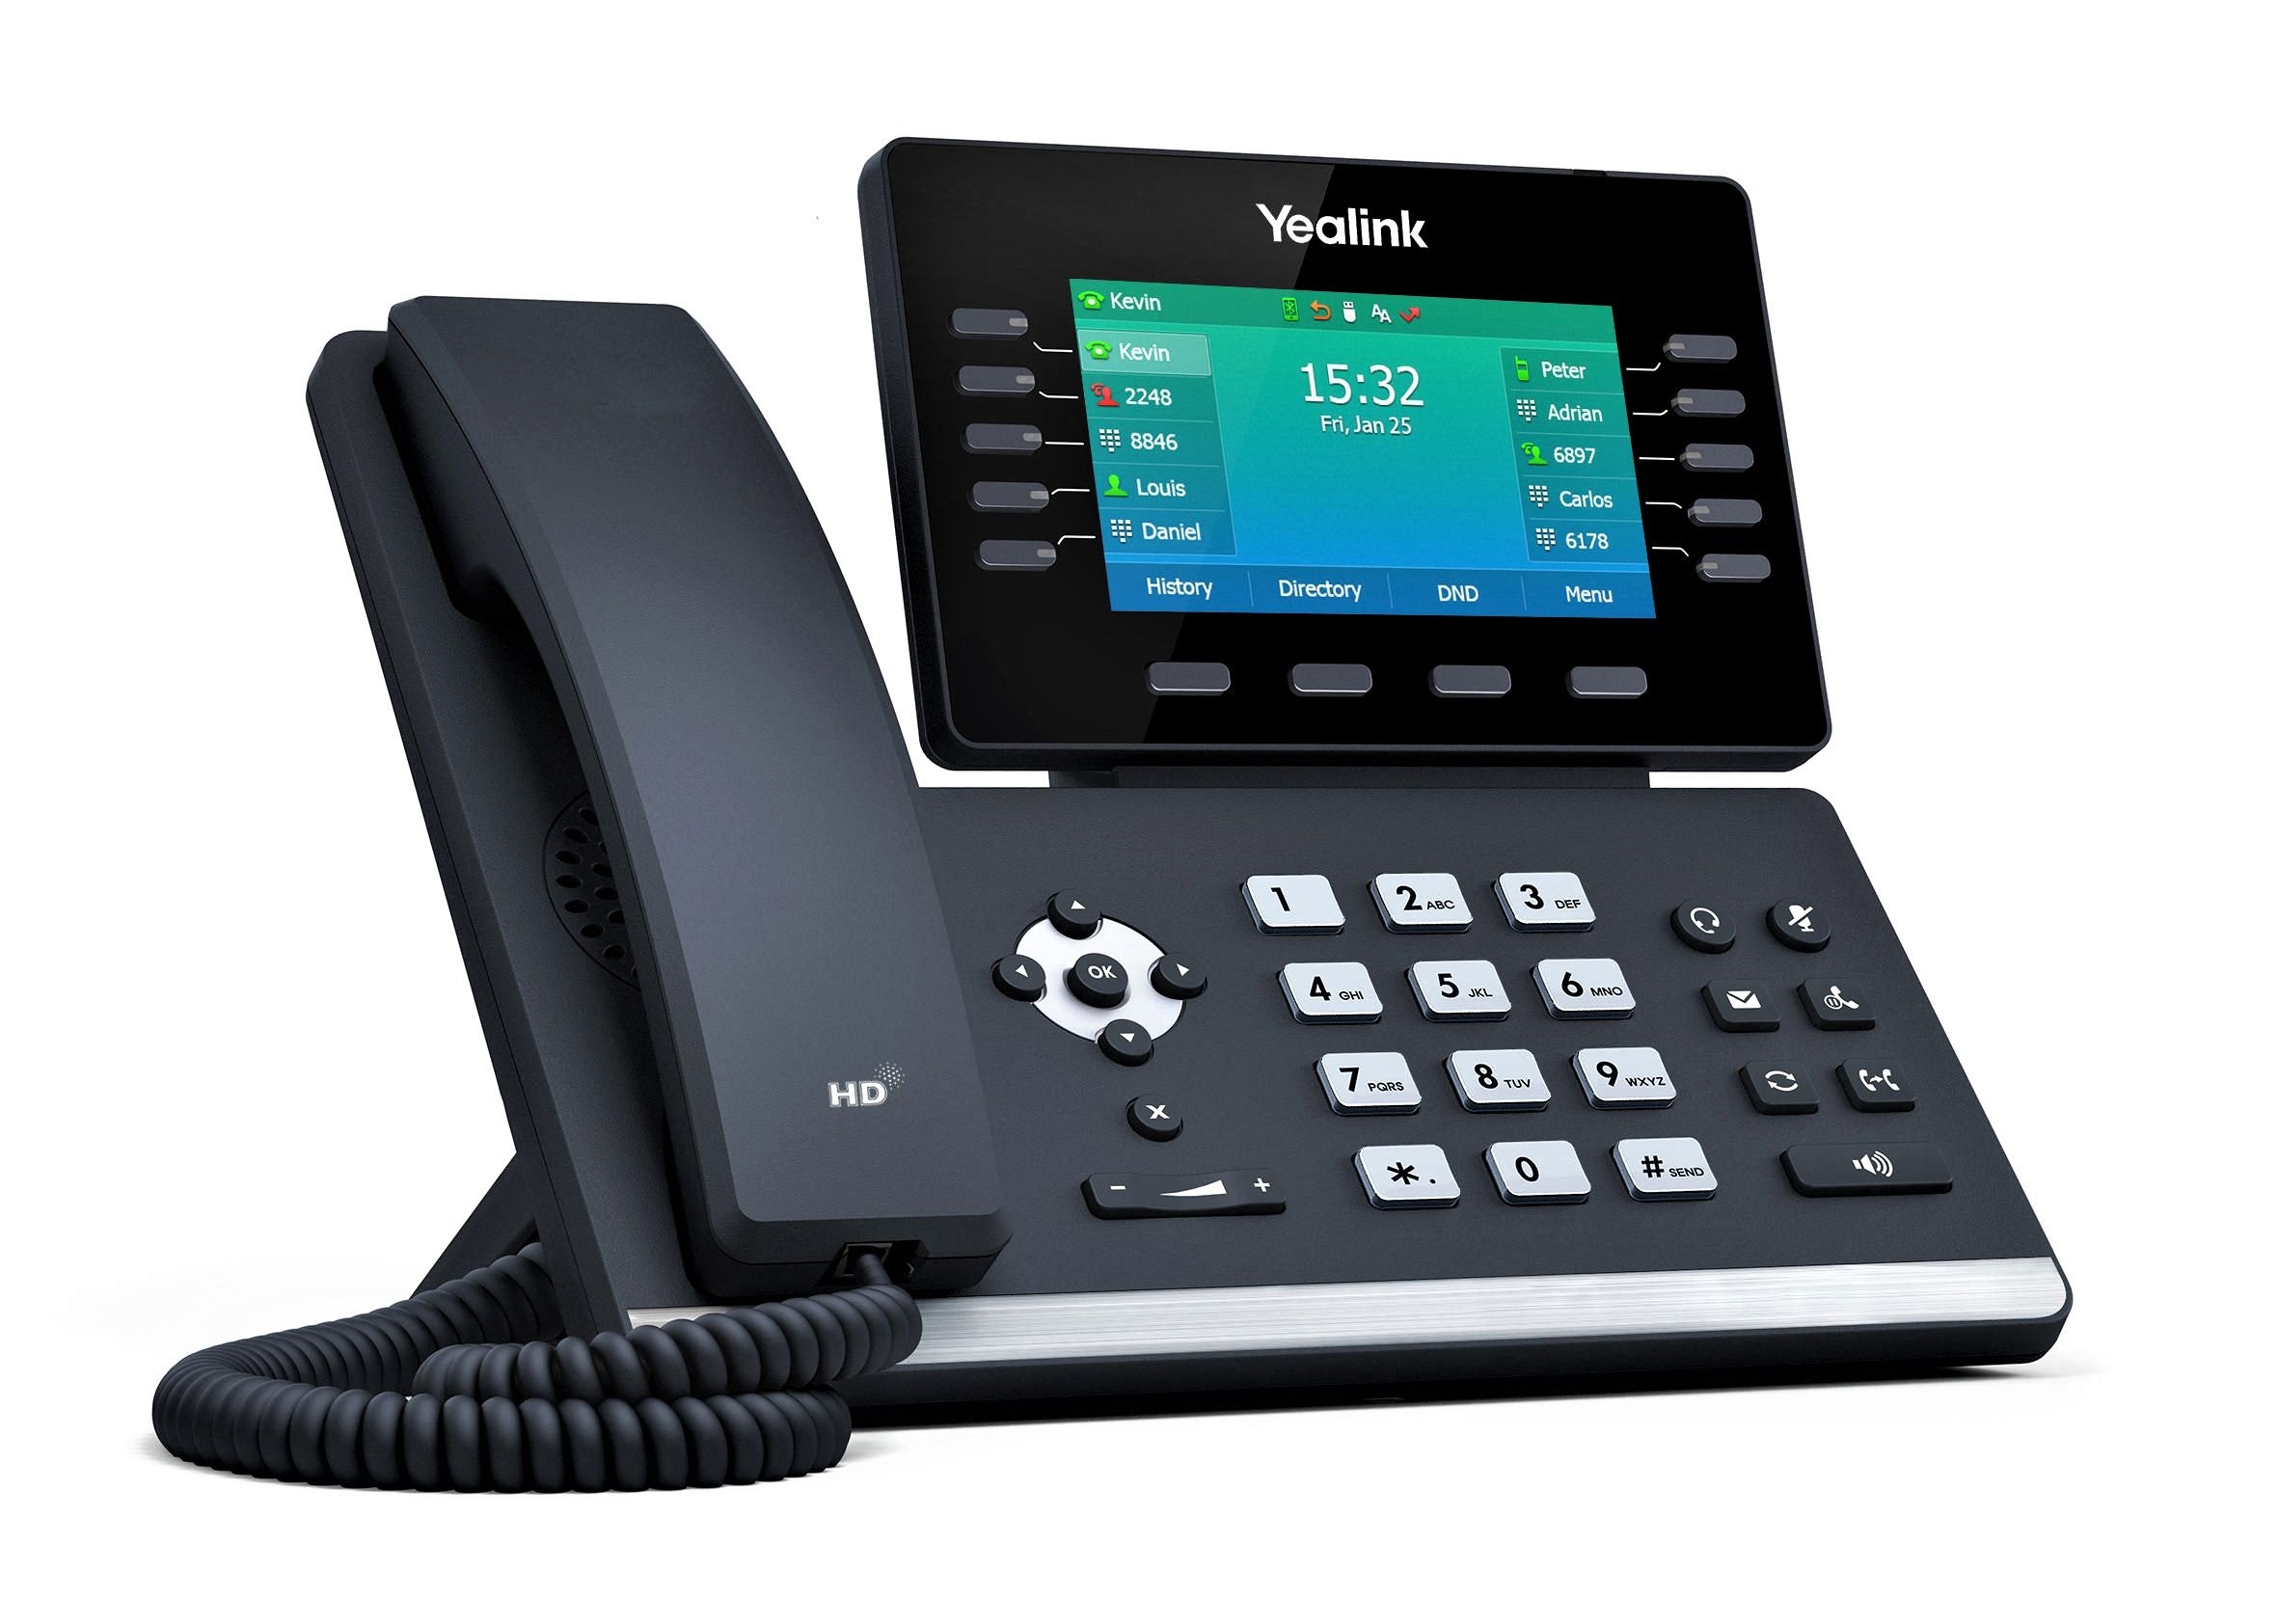 Yealink SIP-T54W IP Phone, 16 VoIP Accounts. 4.3-Inch Color Display. Adjustable Screen With Built-in USB 2.0, 802.11ac Wi-Fi, Dual-Port Gigabit Ethernet, 802.3af PoE, Power Adapter Not Included